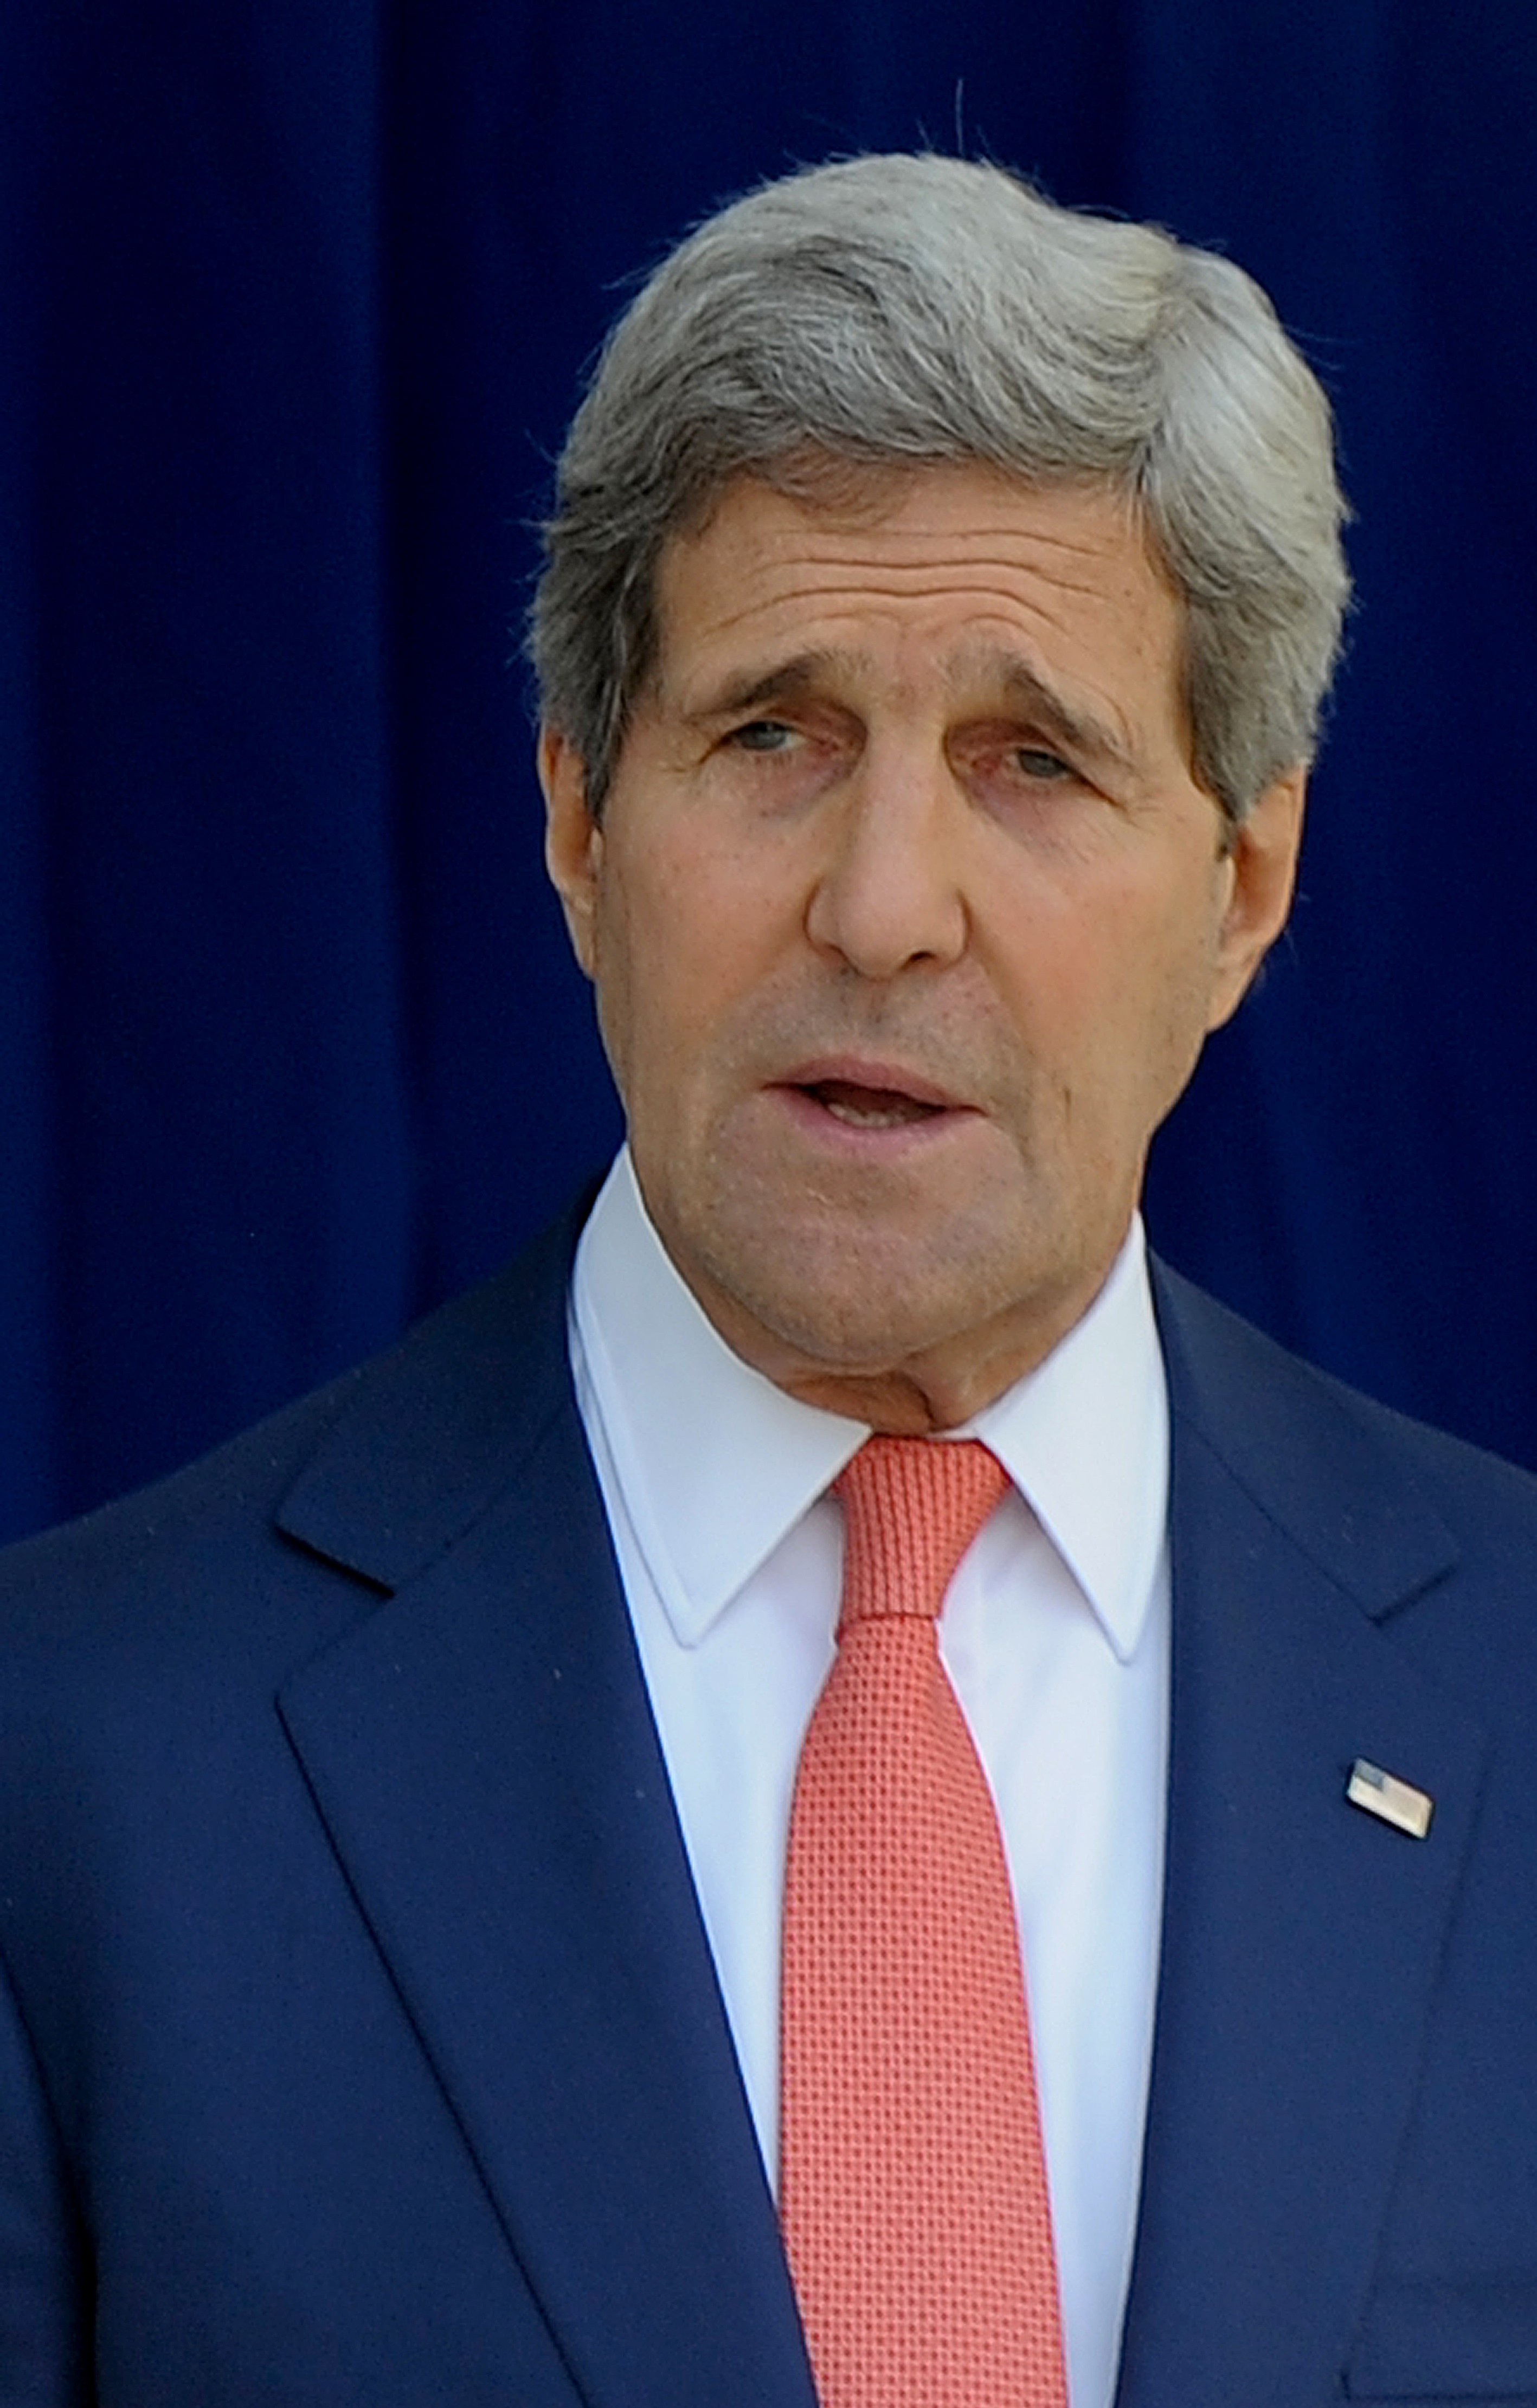 U.S. Secretary of State John Kerry speaks during a press conference within his official visit in Lagos, Nigeria on January 25, 2015. (Anadolu Agency&mdash;Getty Images)